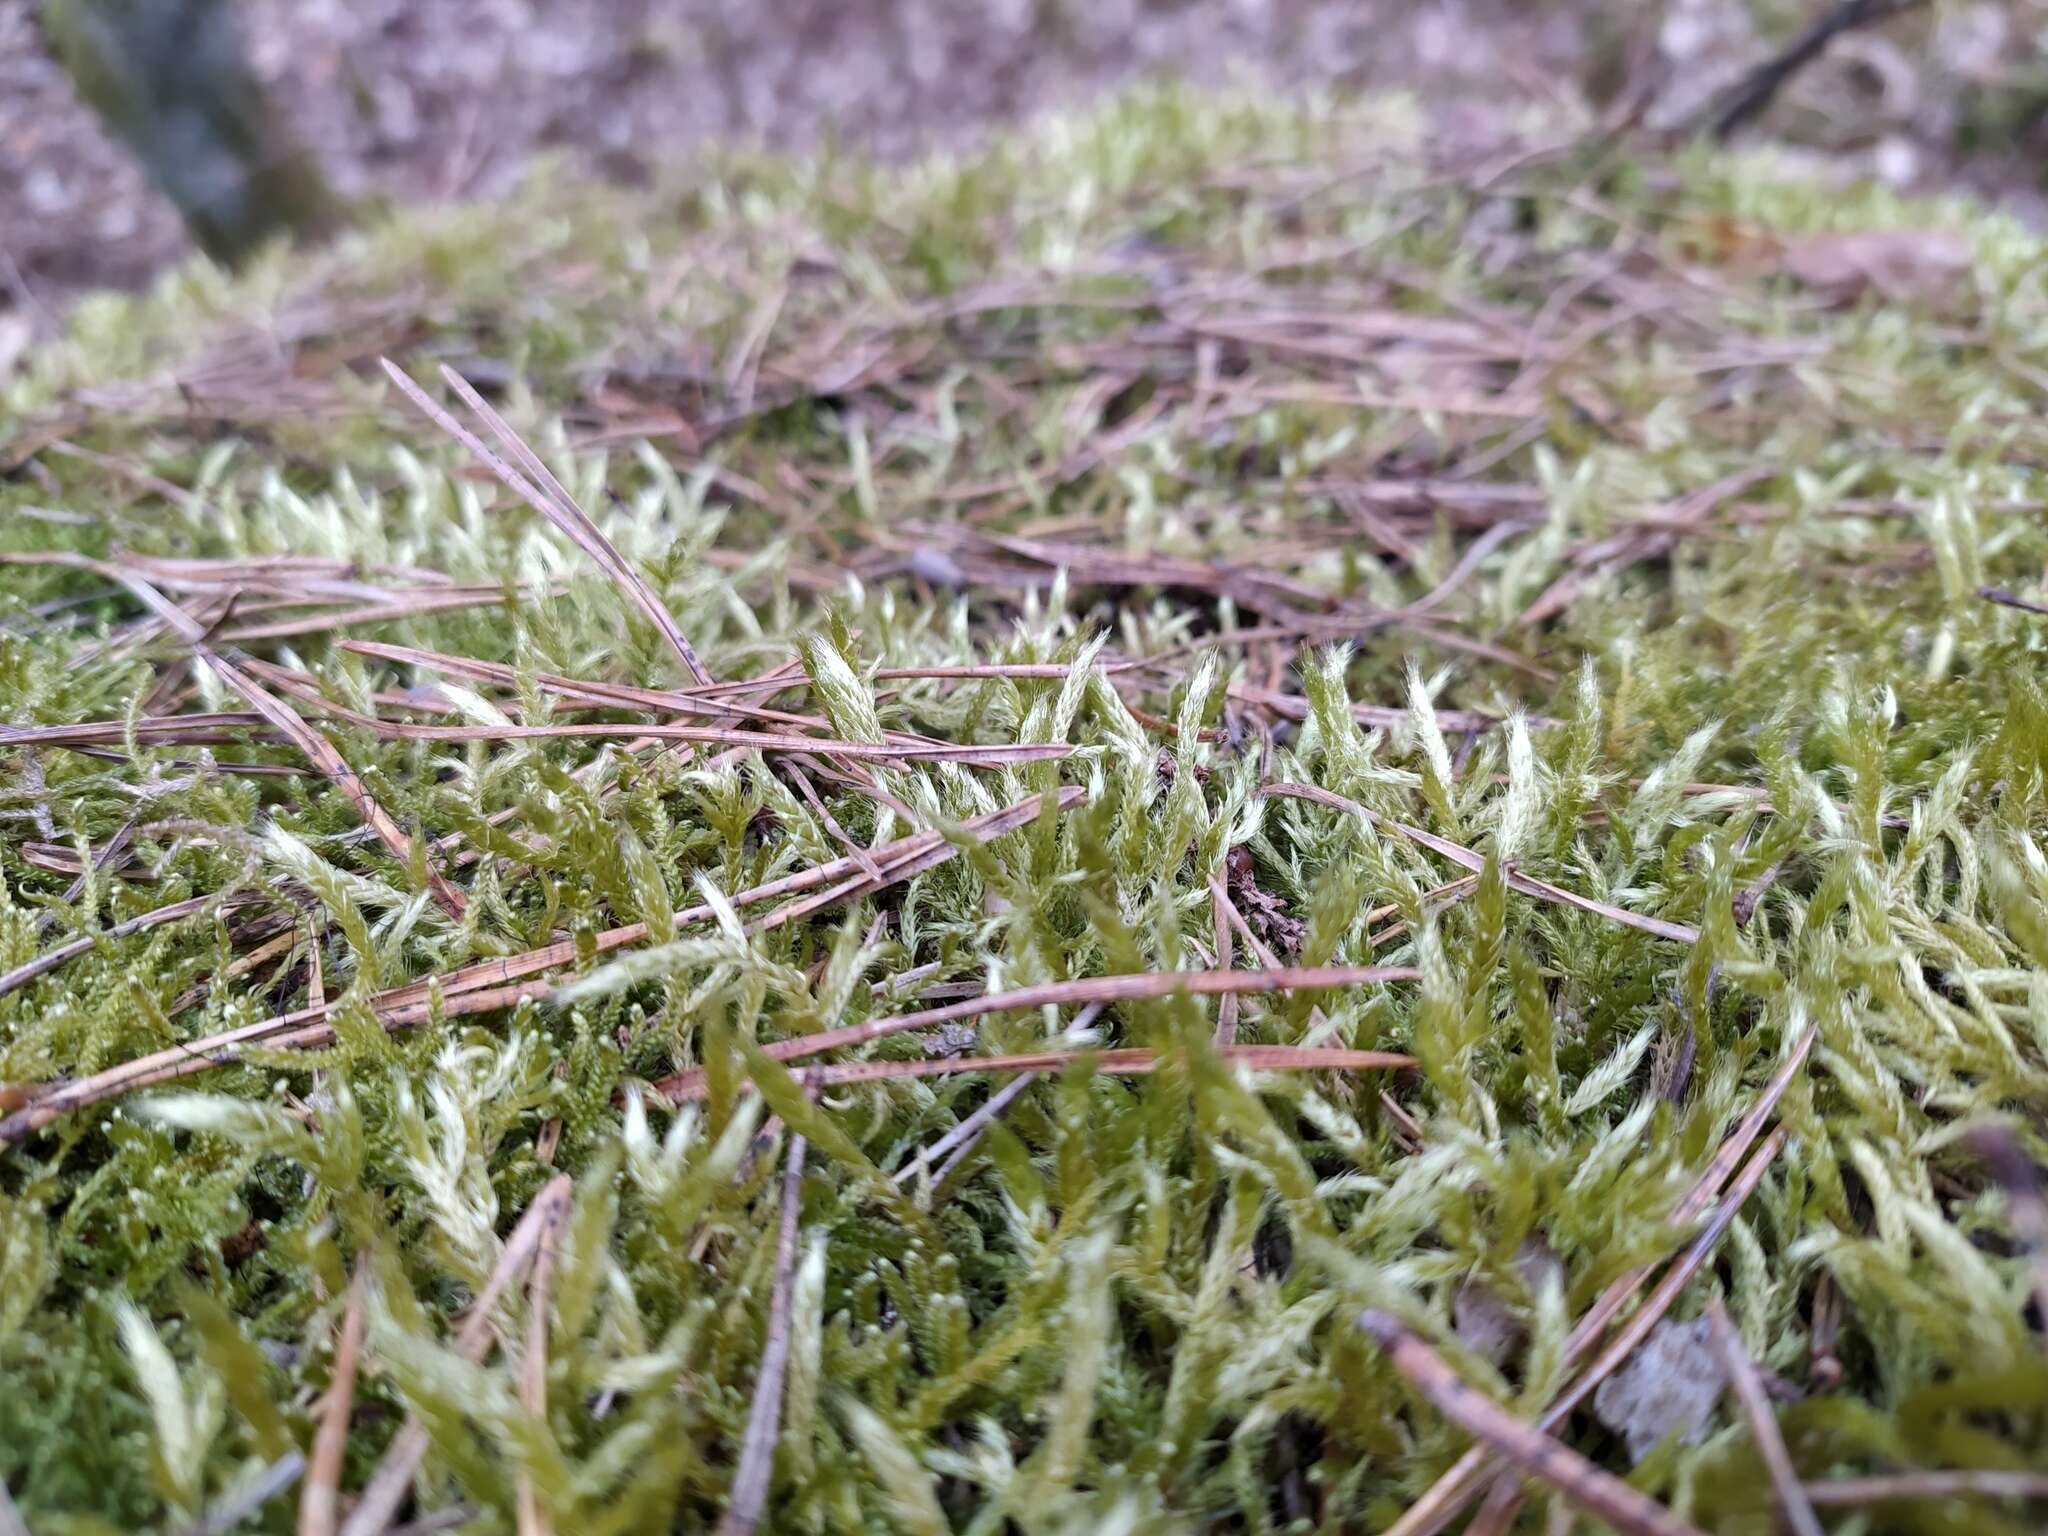 Image of streaky feather-moss